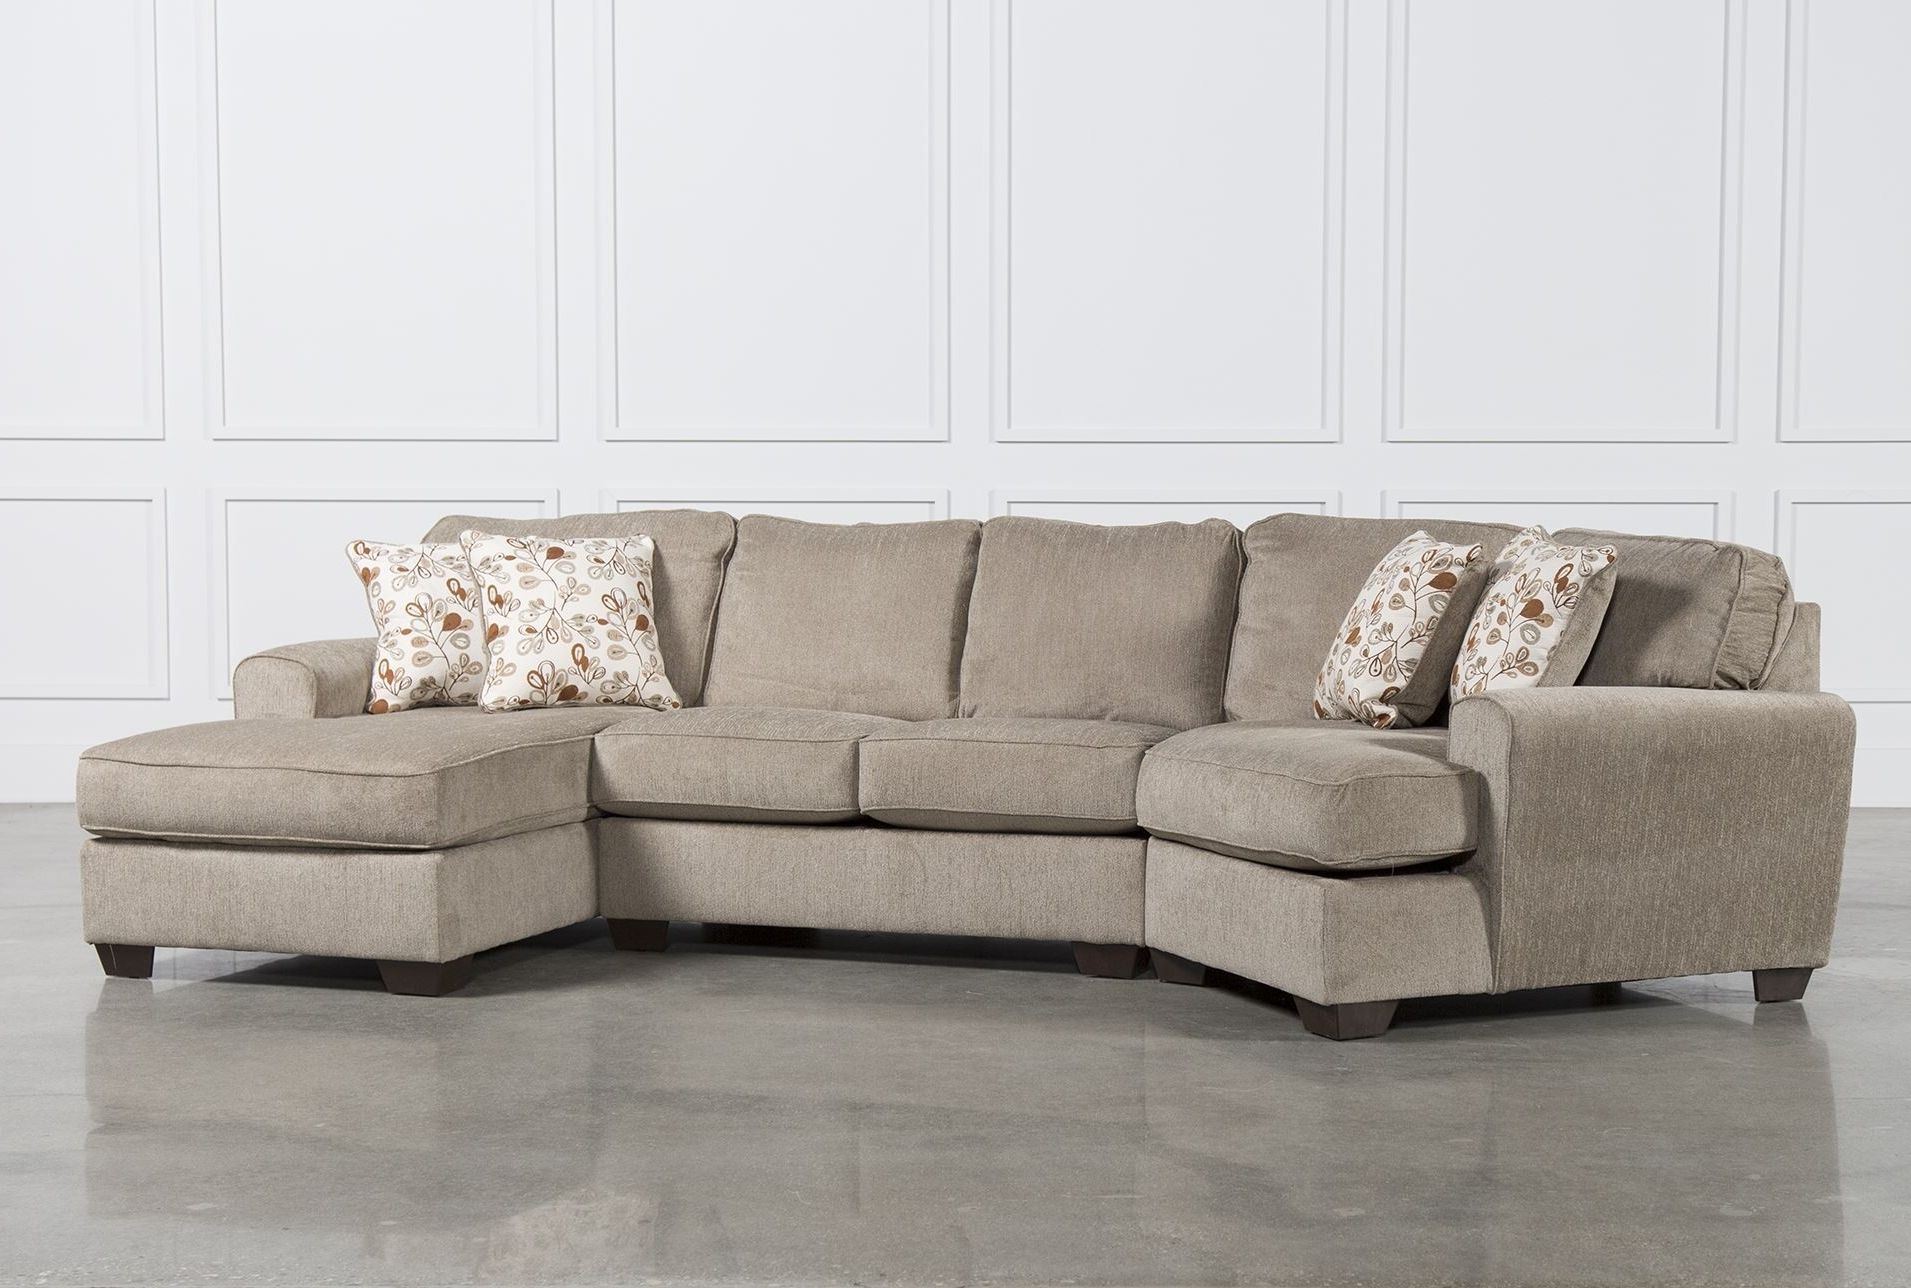 Small Couches With Chaise Intended For Recent Small Sofa With Cuddler (View 10 of 15)